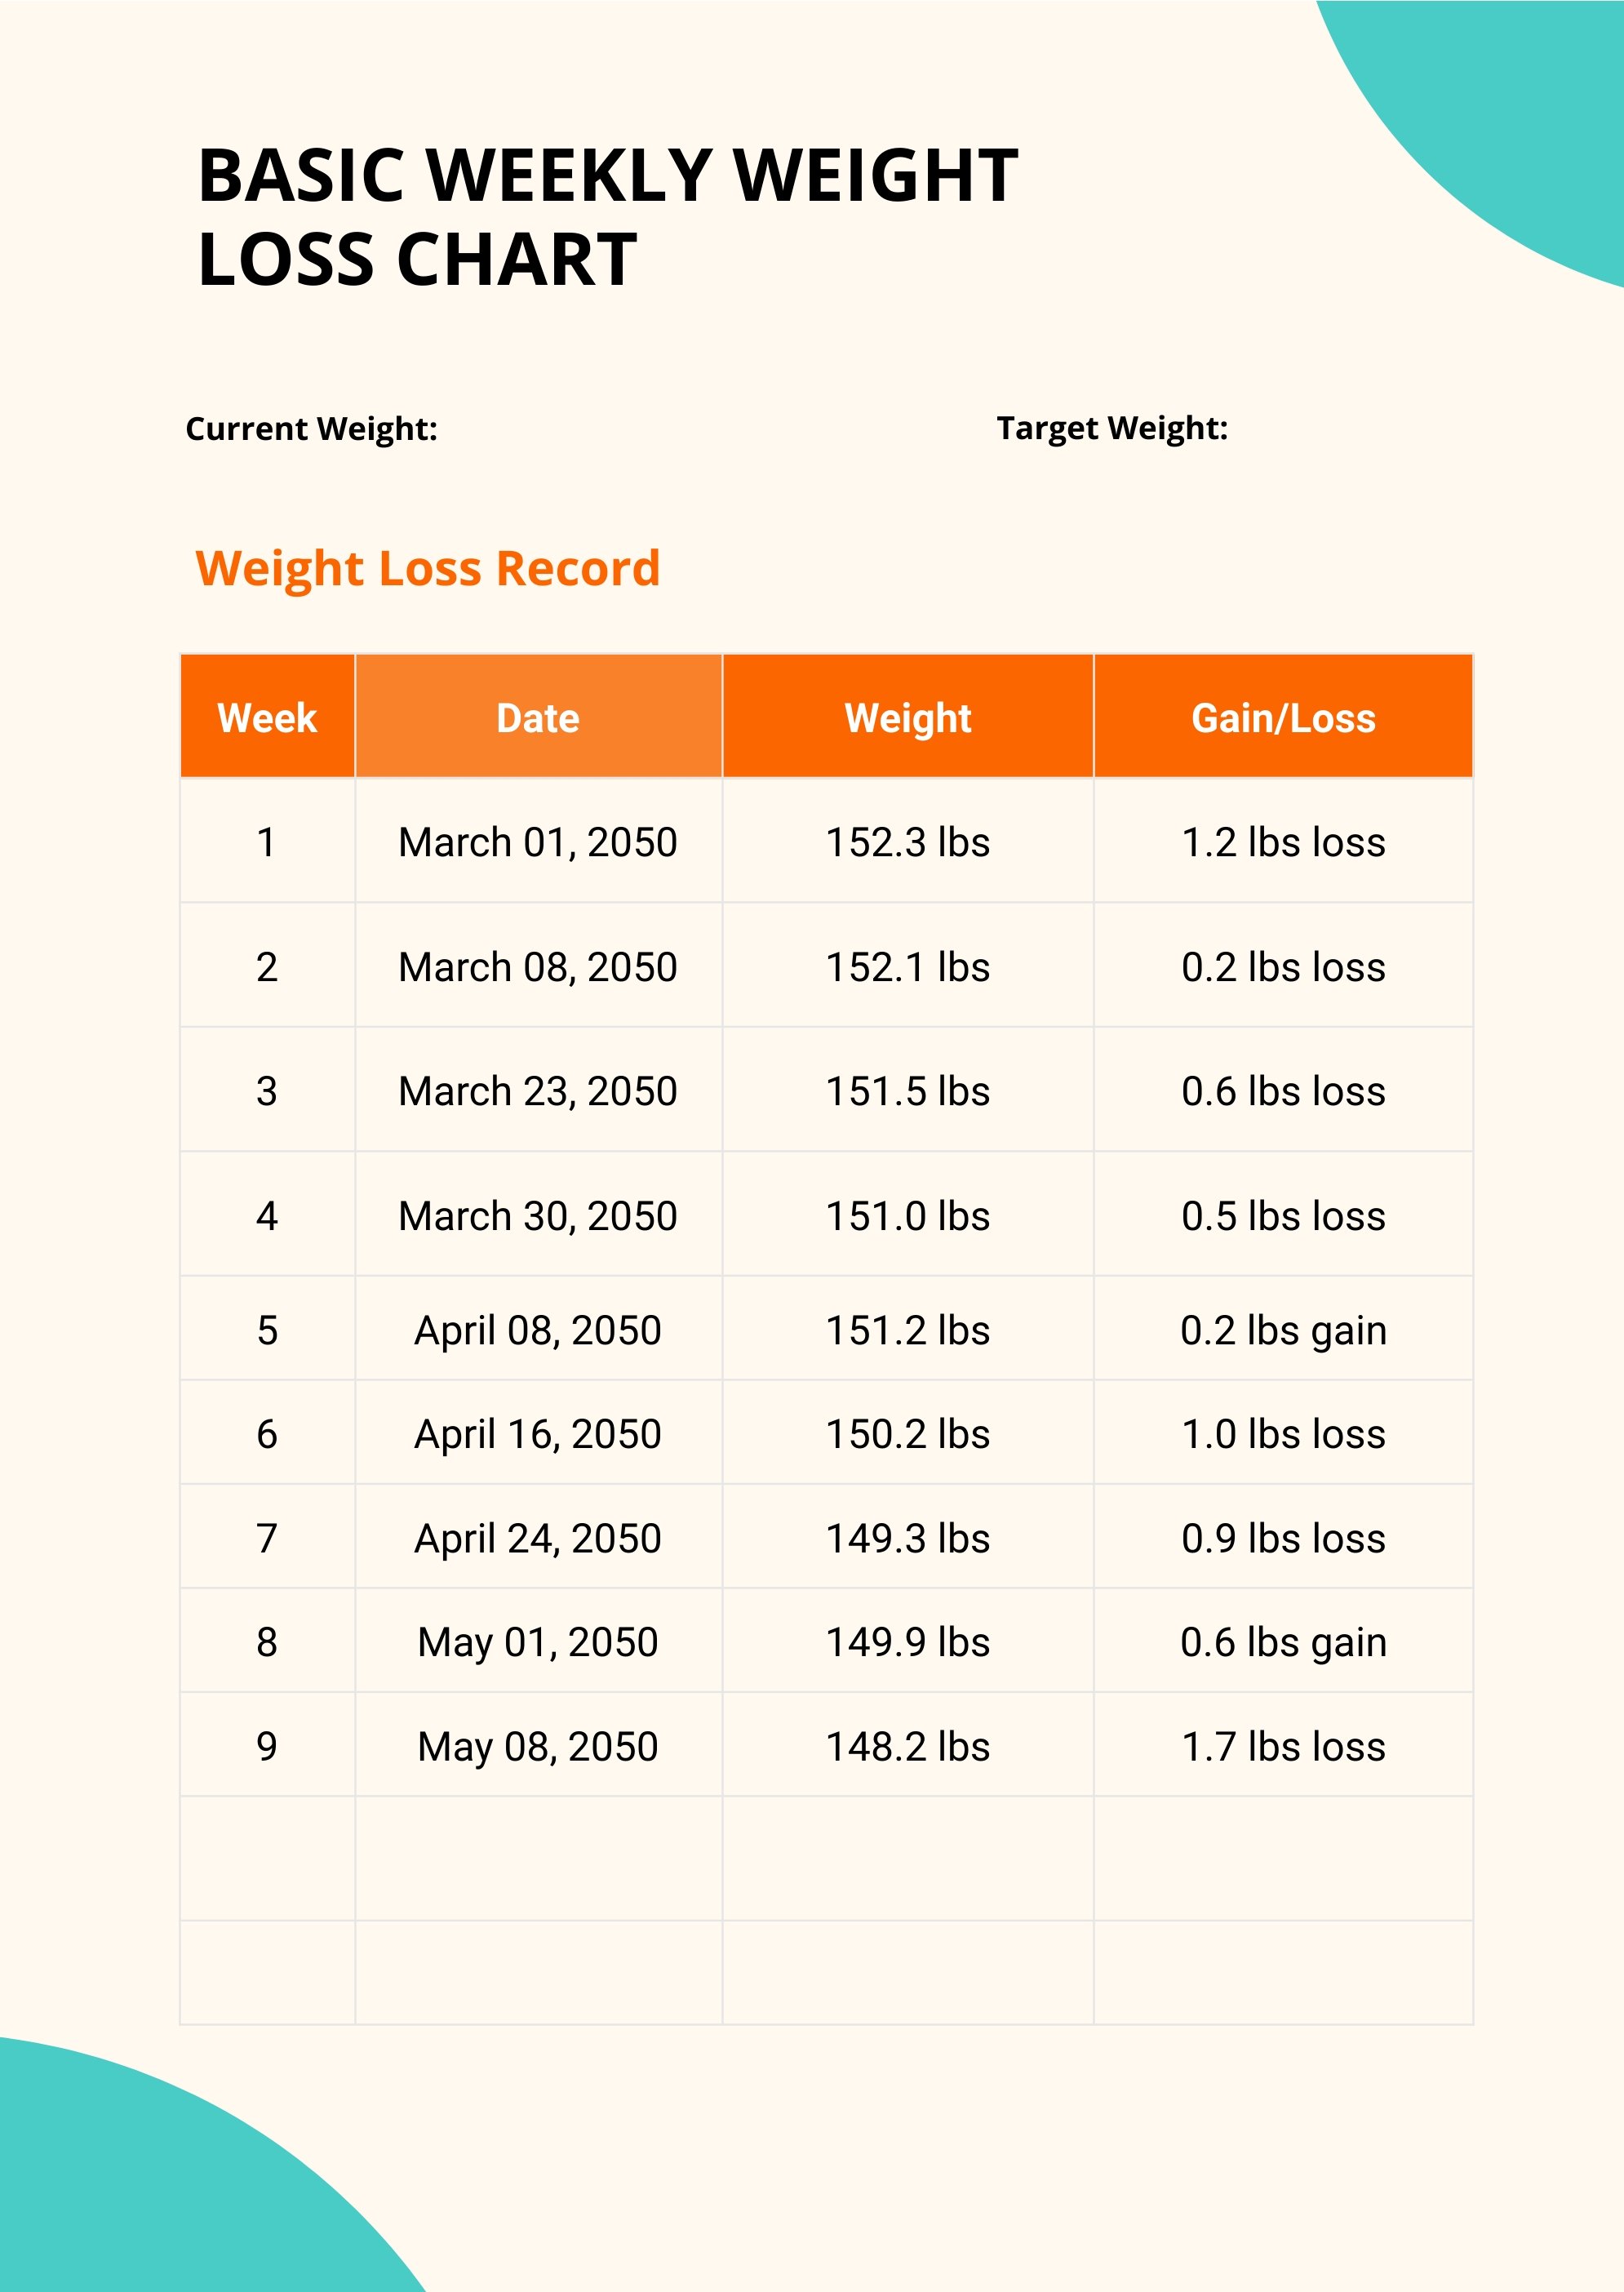 Basic Weekly Weight Loss Chart in PDF, Illustrator